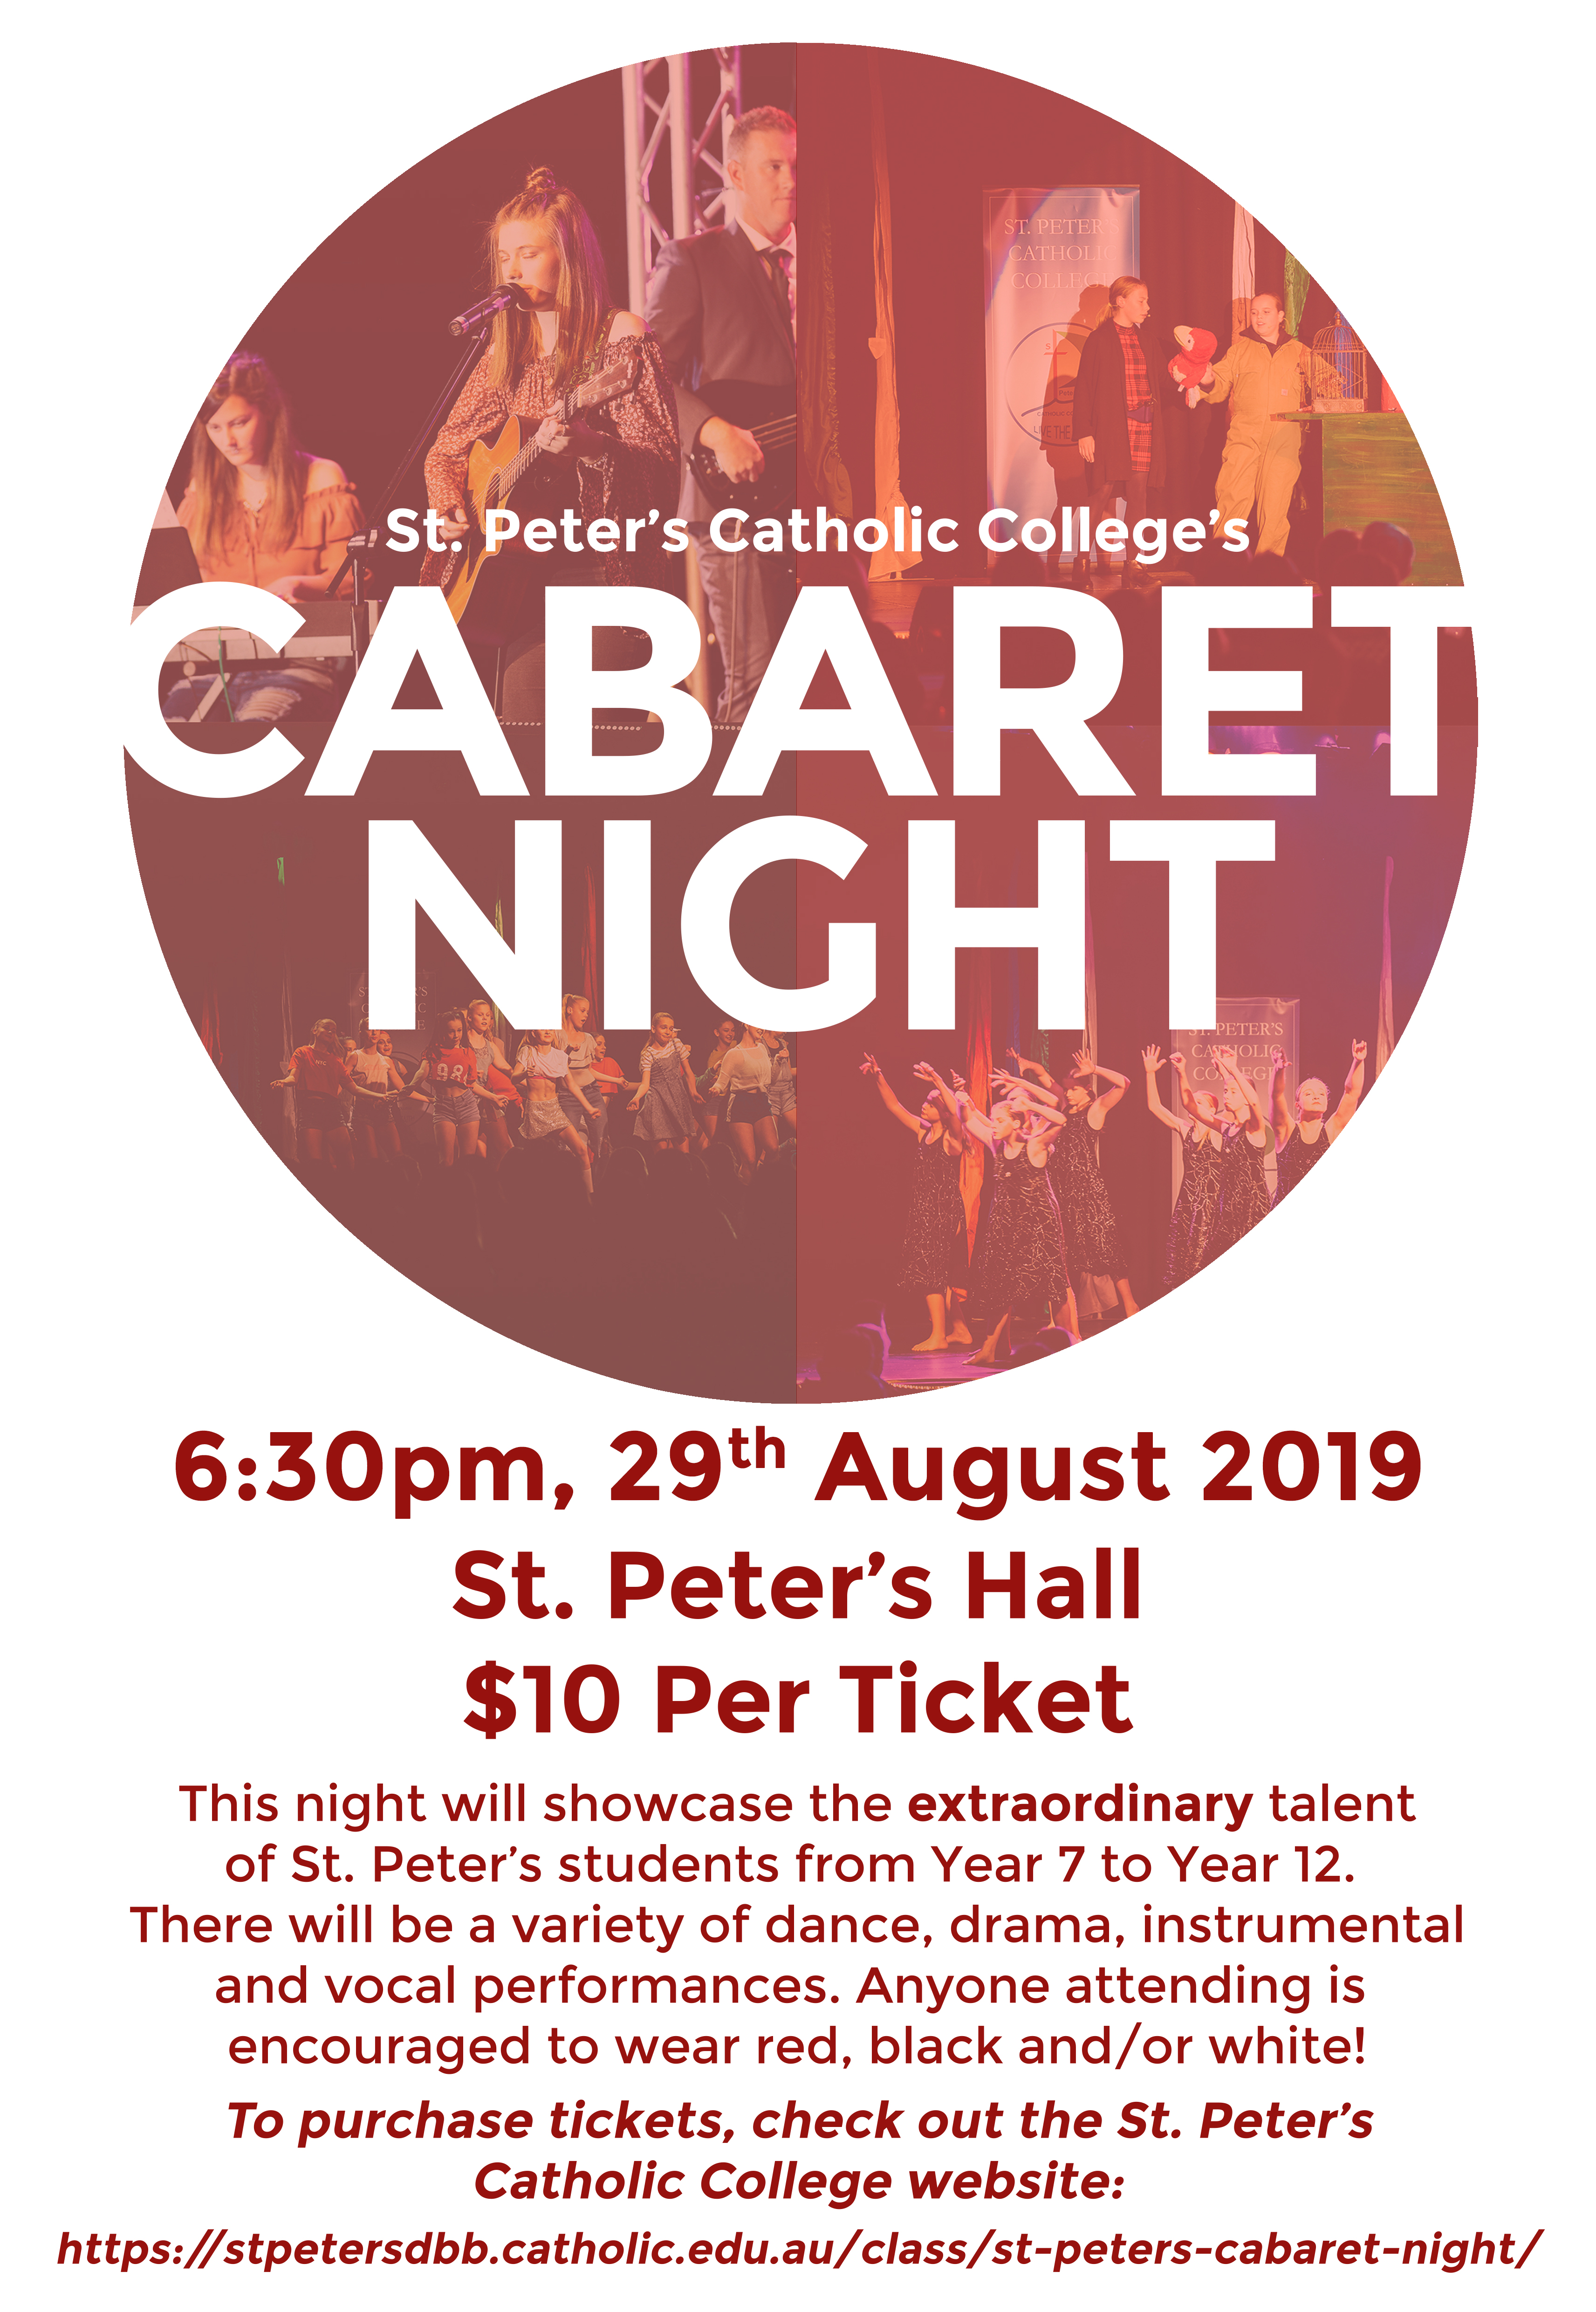 Cabaret Night celebrating the extraordinary talents of our students